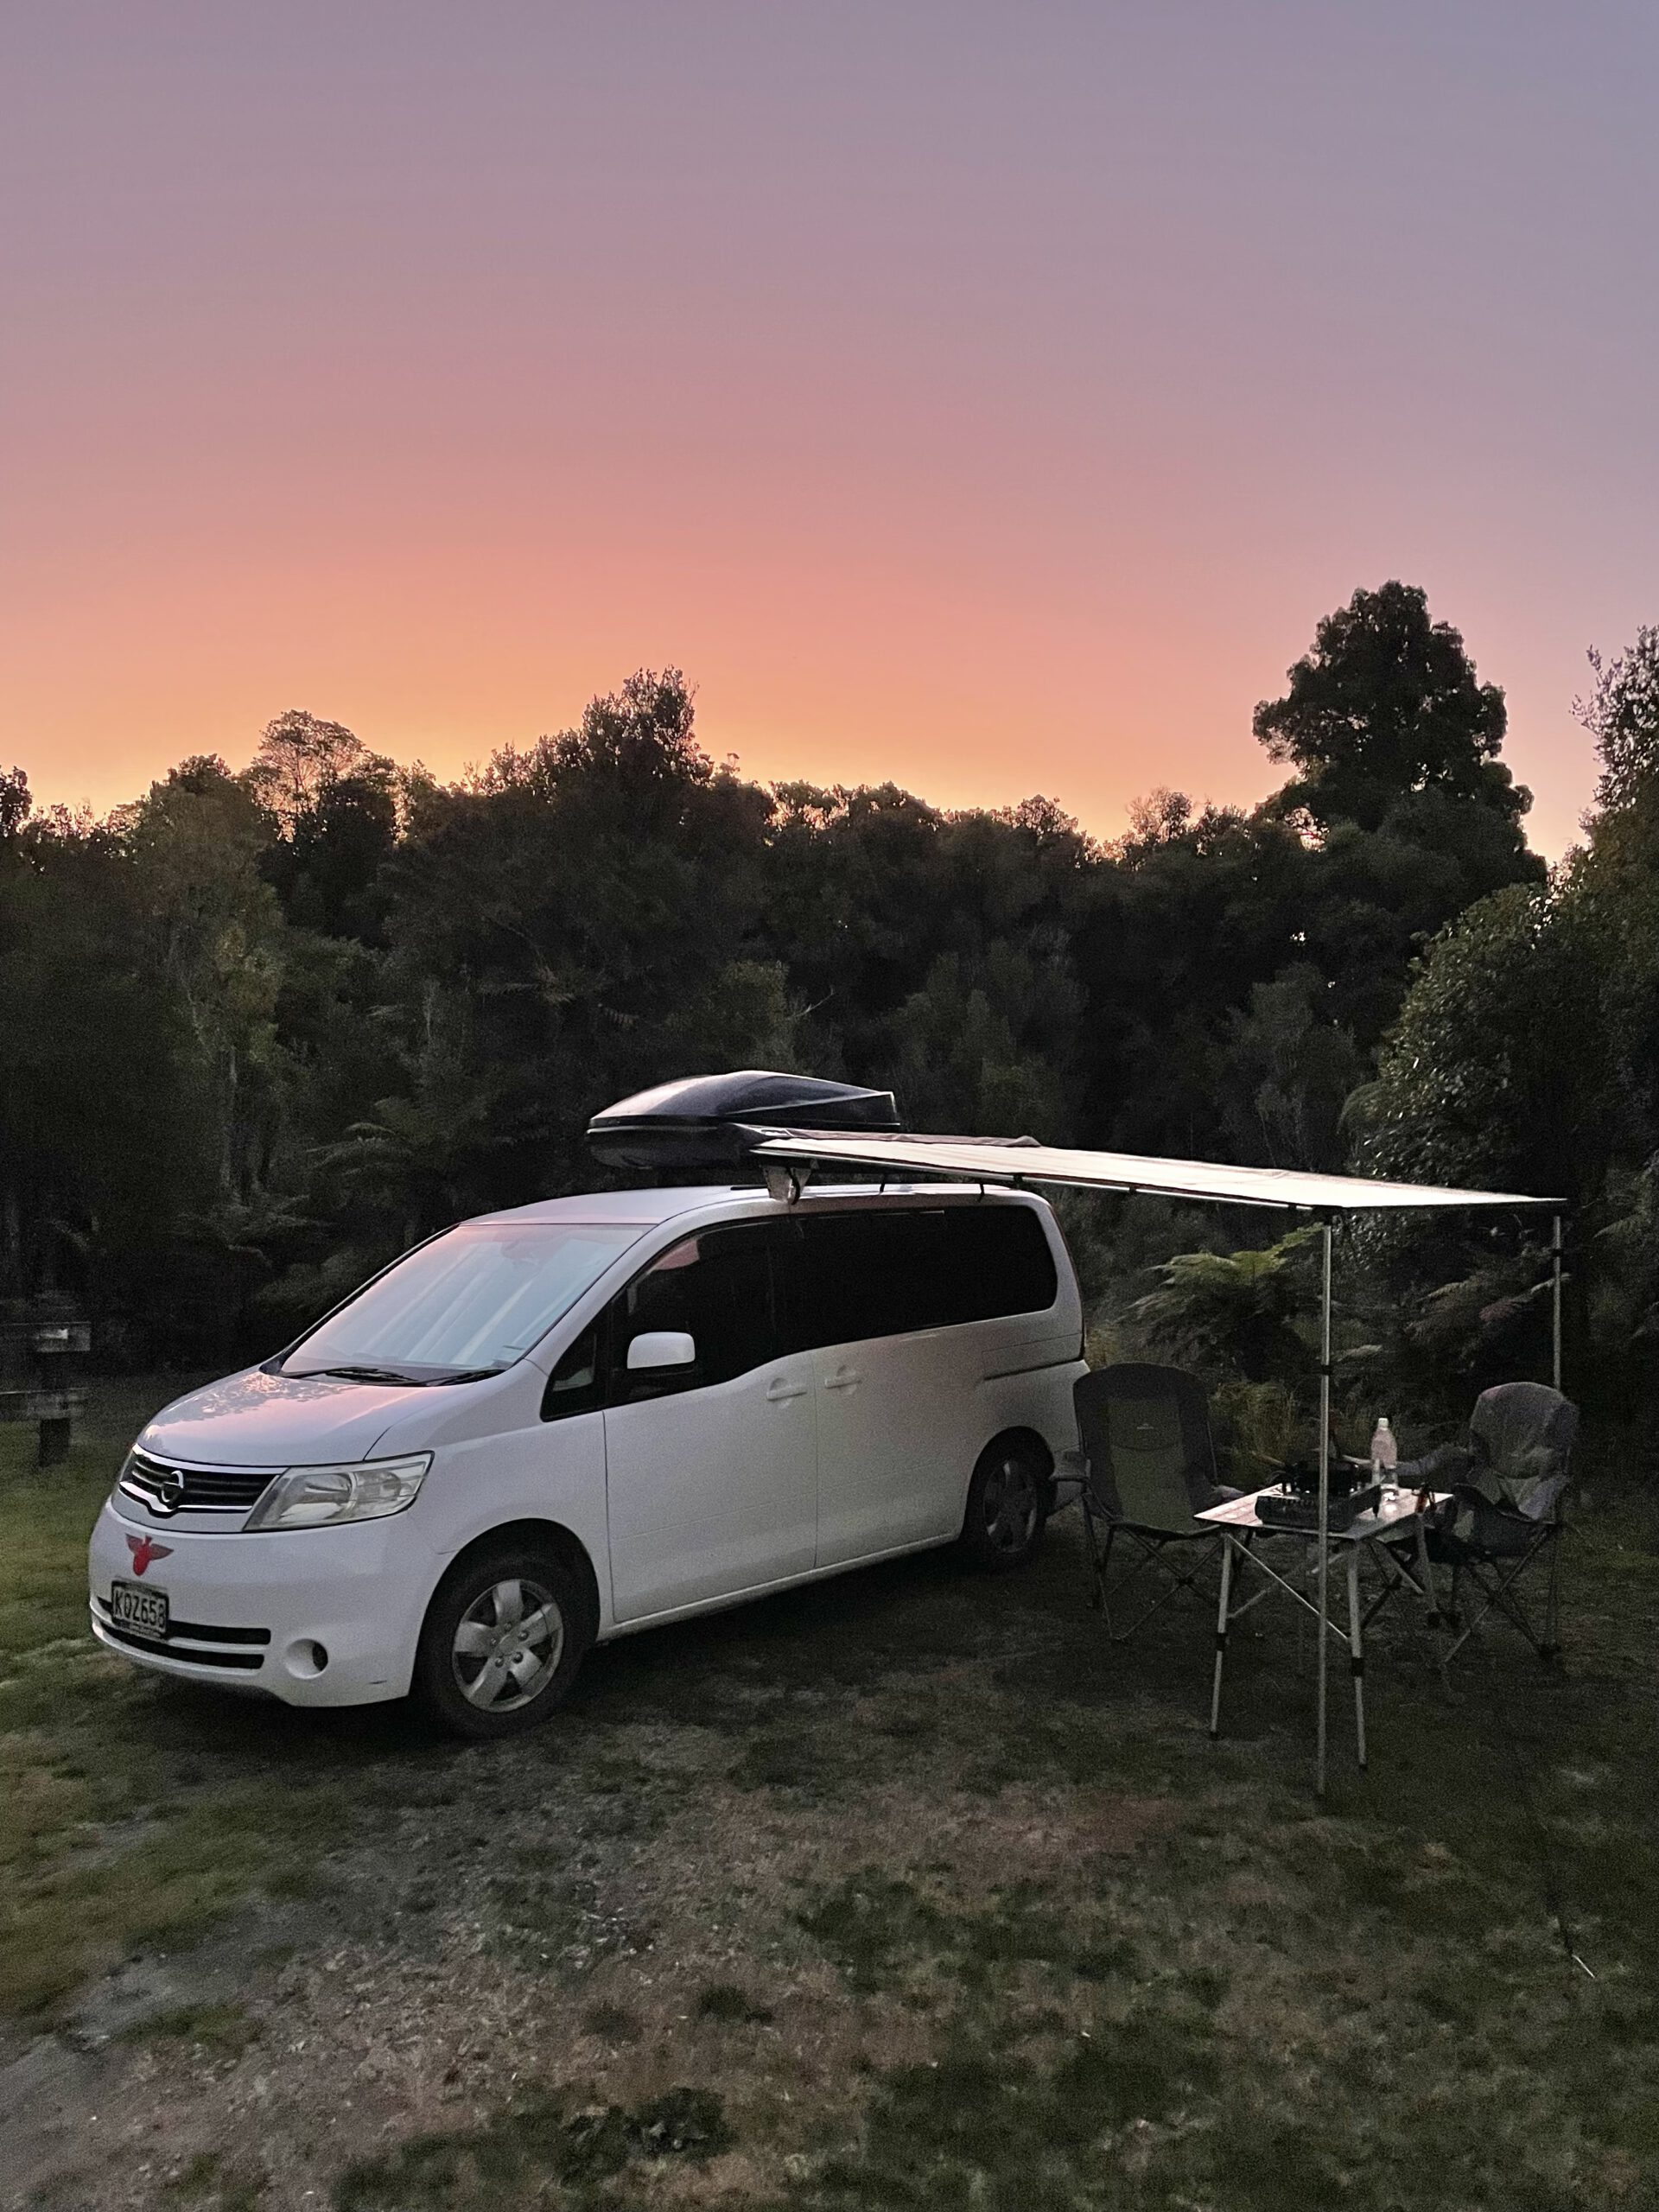 Setting up camp right after buying our second campervan in New Zealand